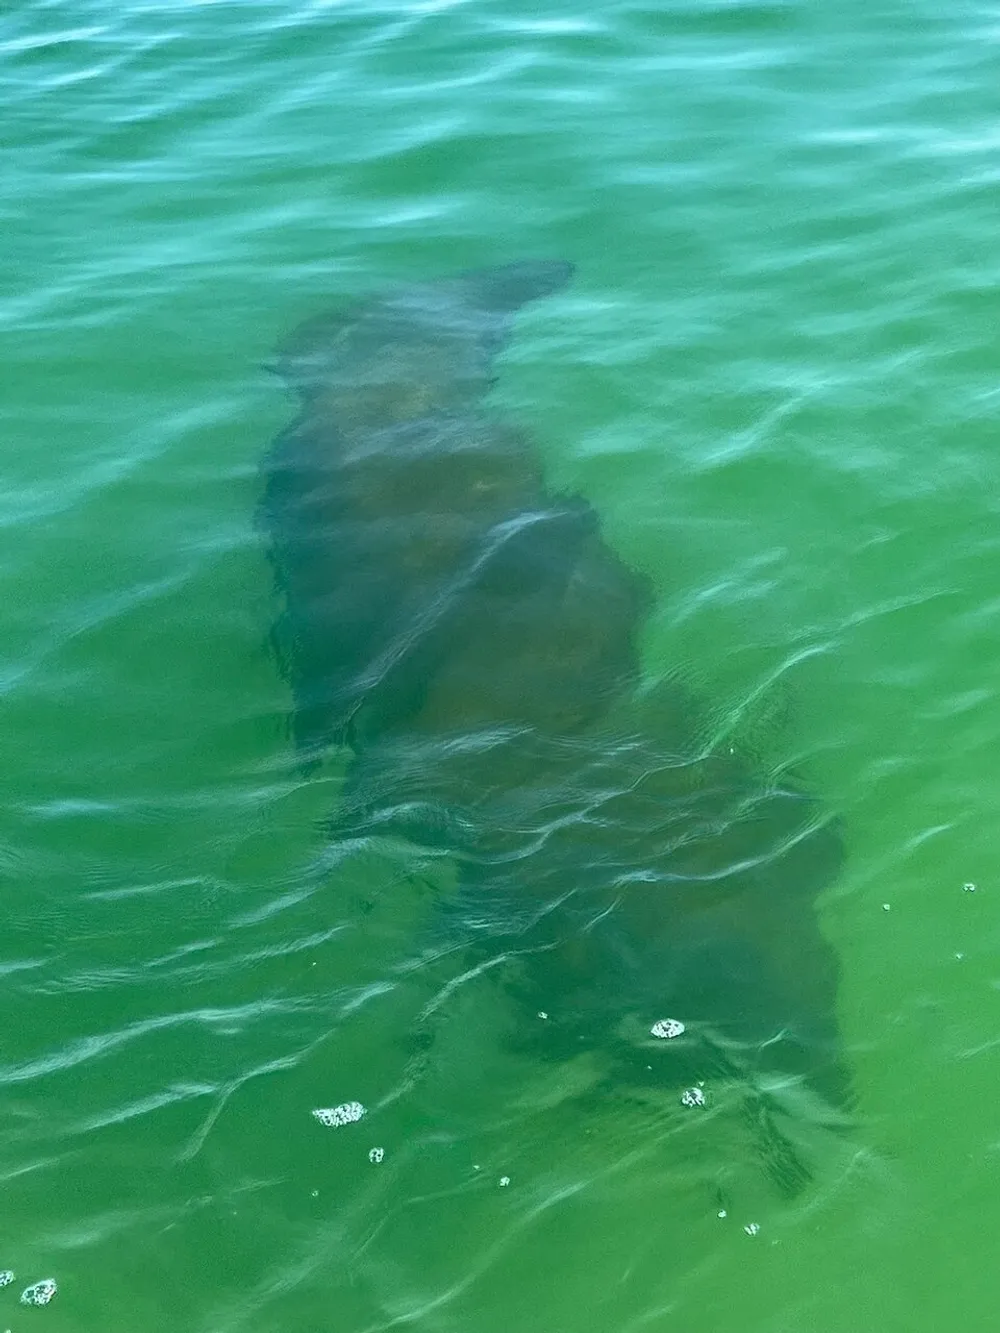 The image shows a large dark shape submerged under the green waters which looks like it might be a marine animal such as a manatee or a large fish